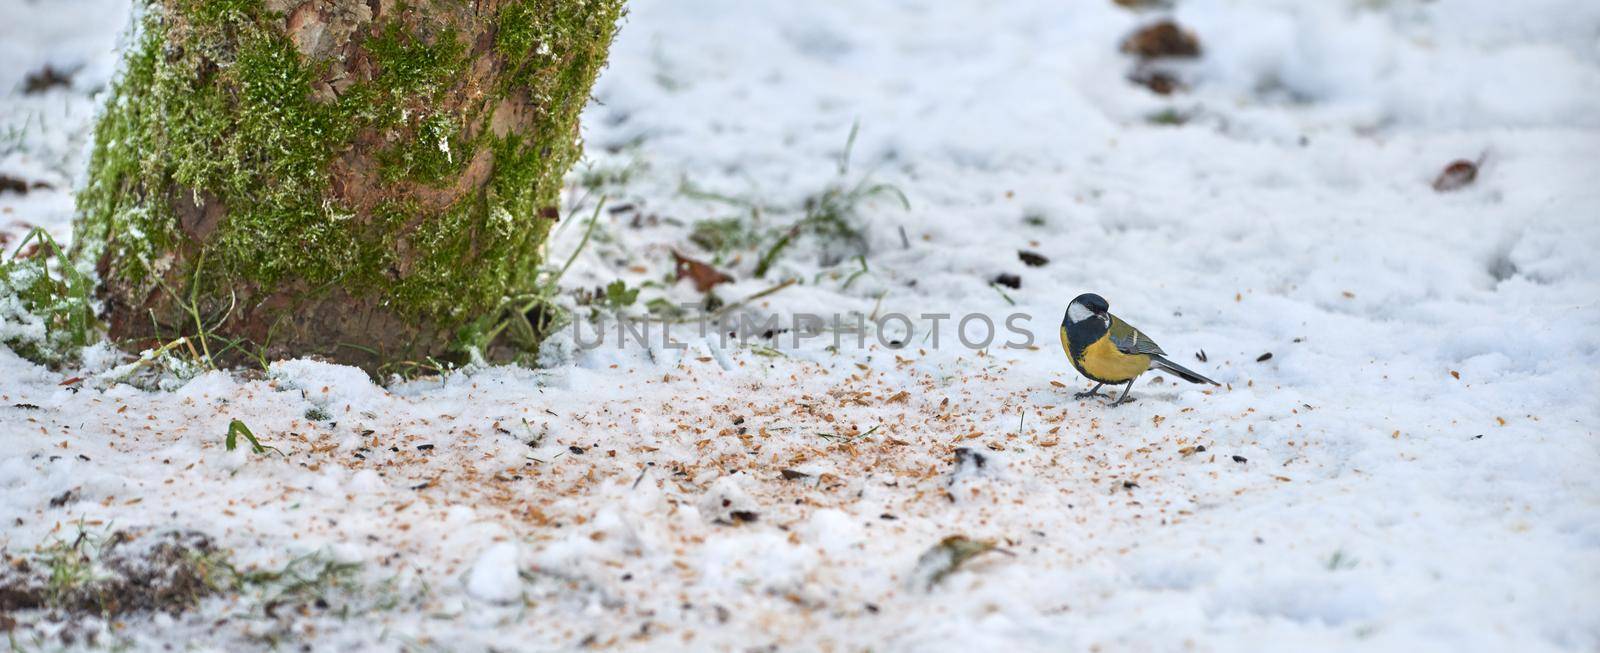 Supporting and feeding bird life during the winter season as part of nature conservation and protection. Eurasian blue tit standing outside on the snow during an icy and cold morning after snow fall.